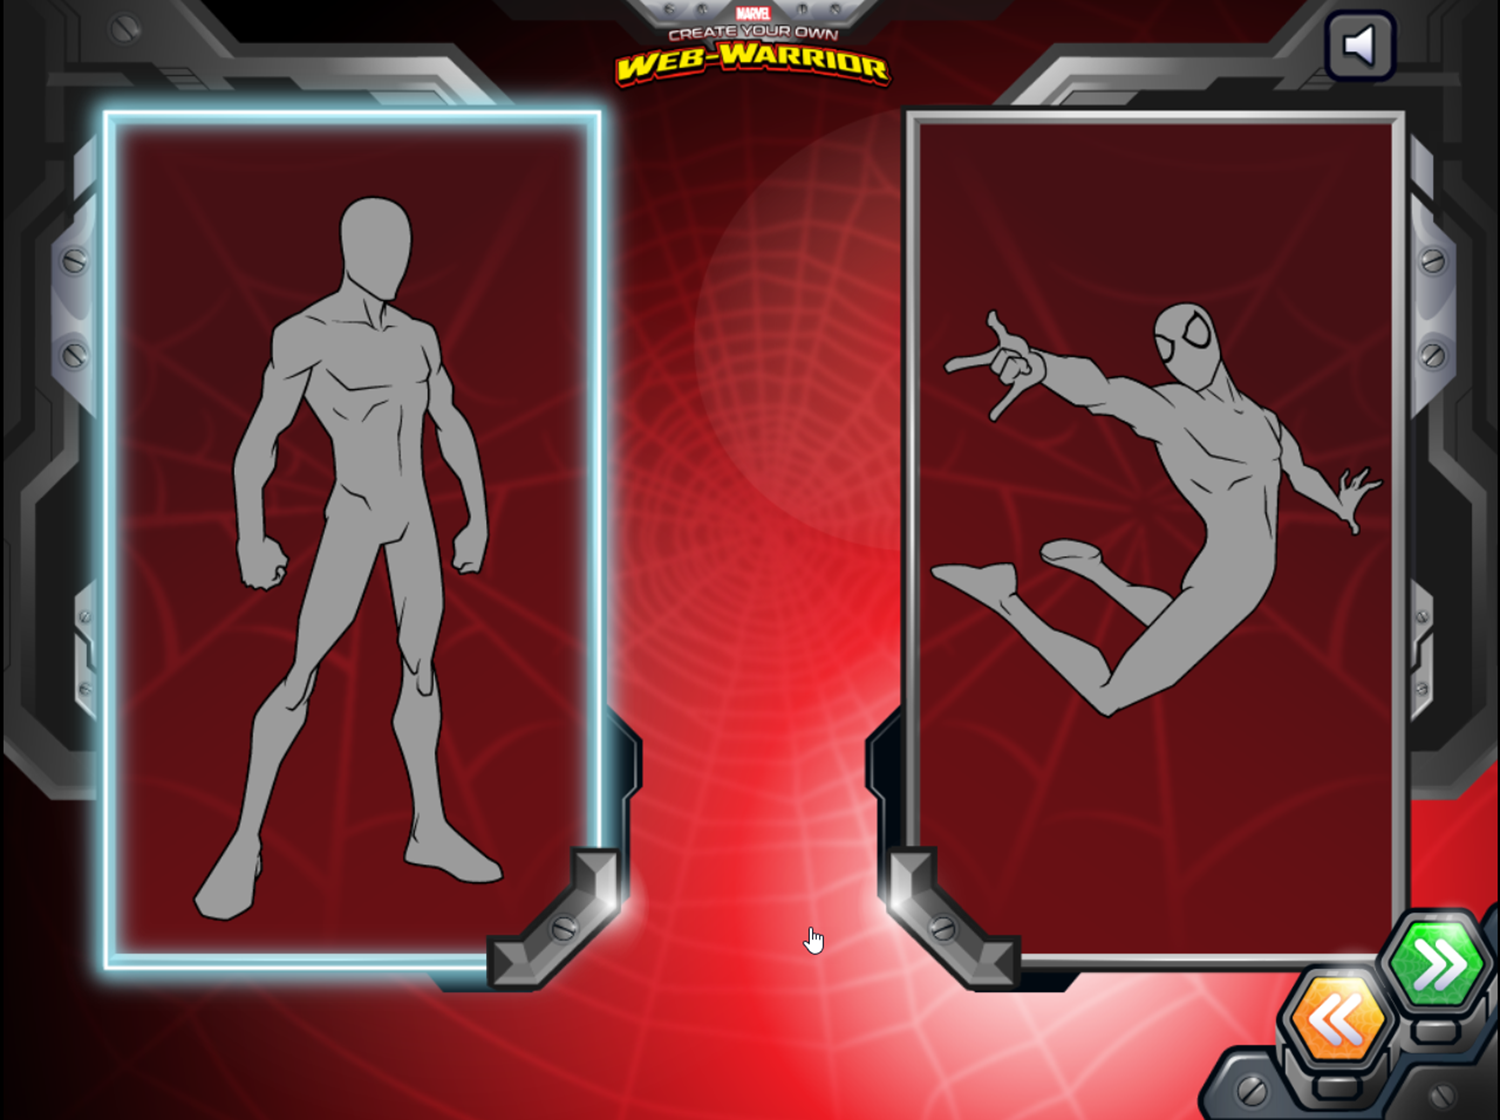 Spider-Man Create Your Own Web-Warrior Game Pose Select Screenshot.